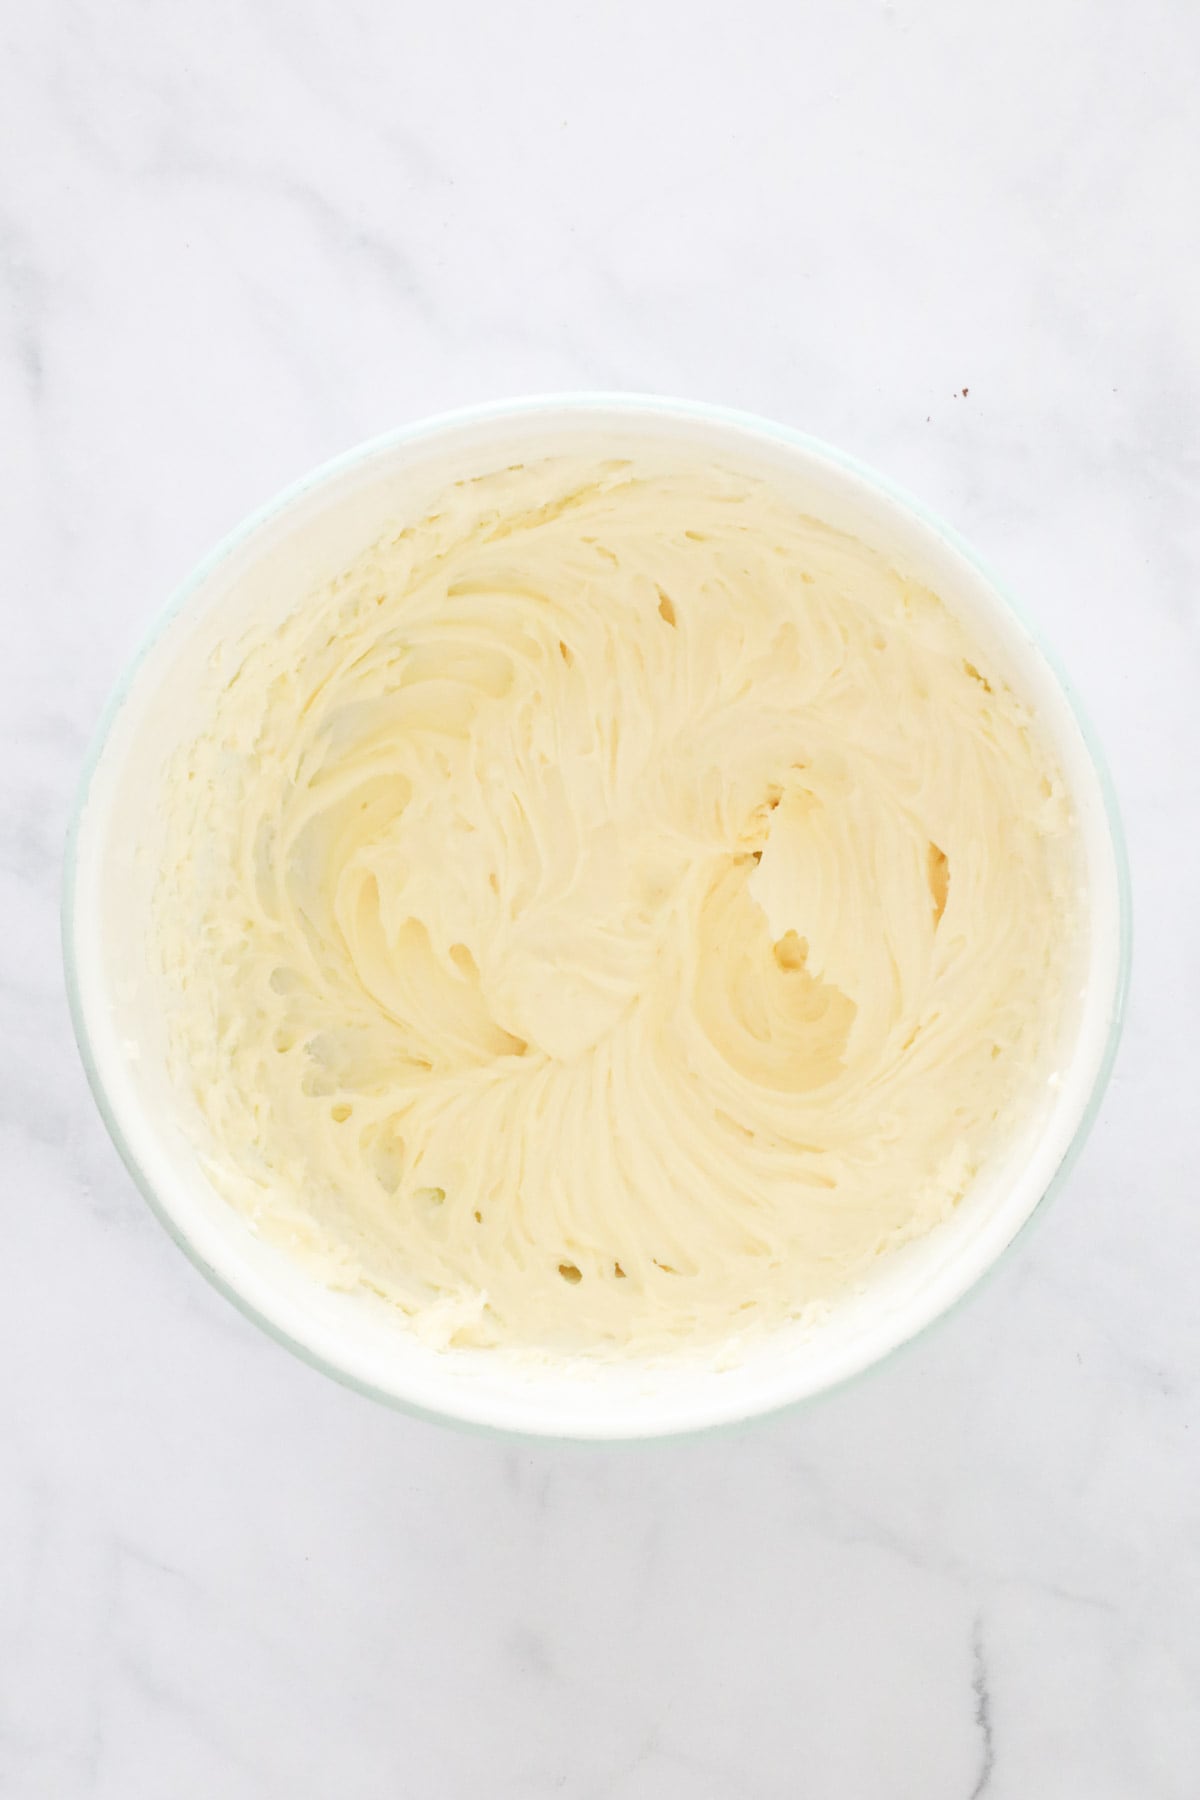 Cream lightly whipped in a mixing bowl.